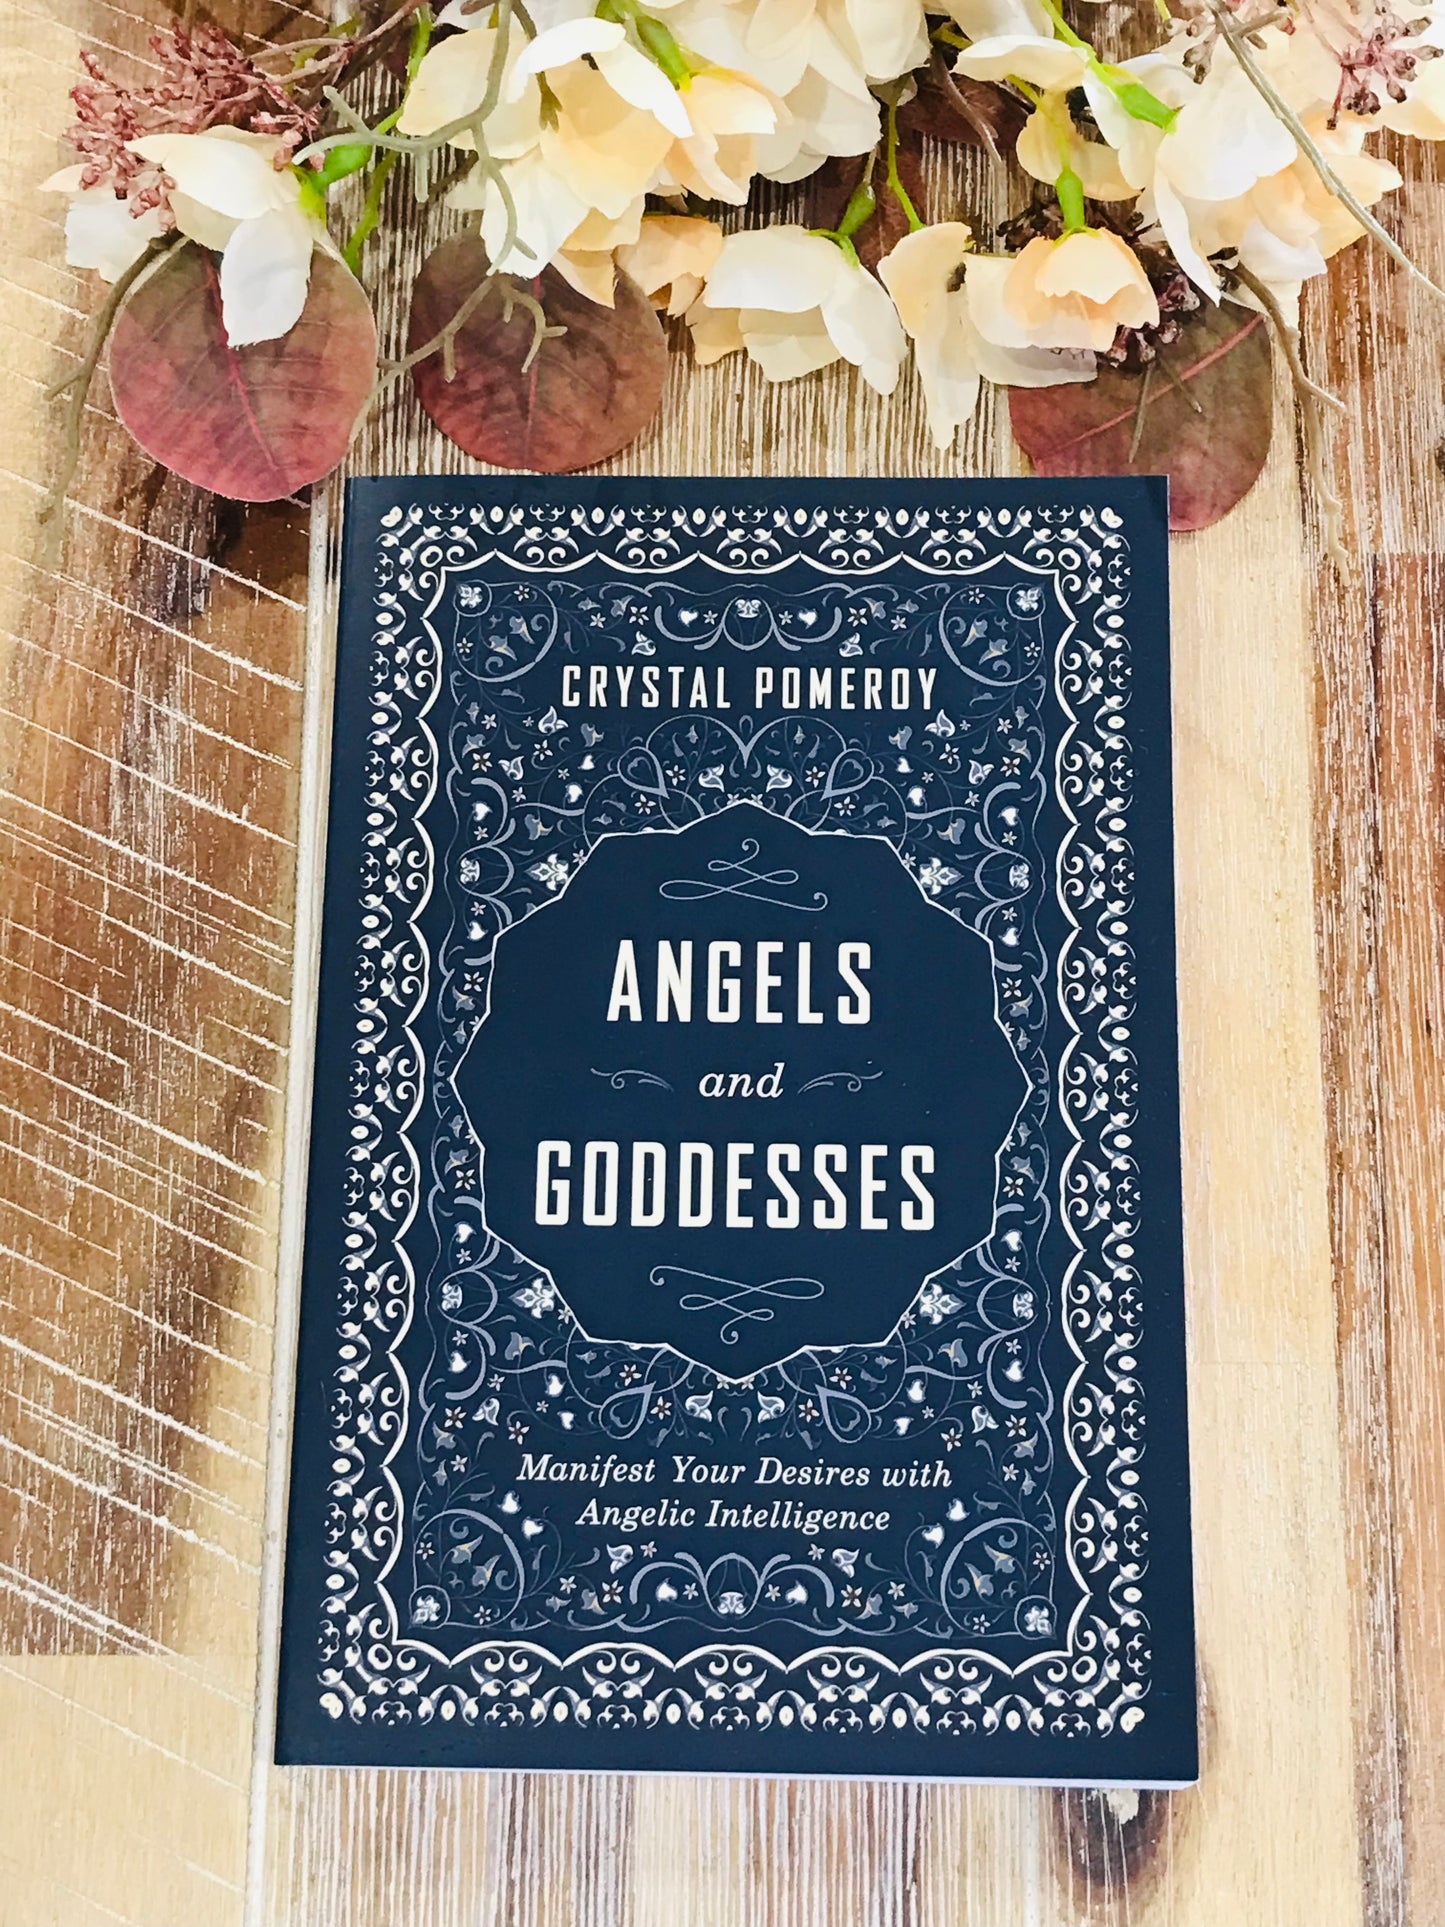 Angels and Goddesses